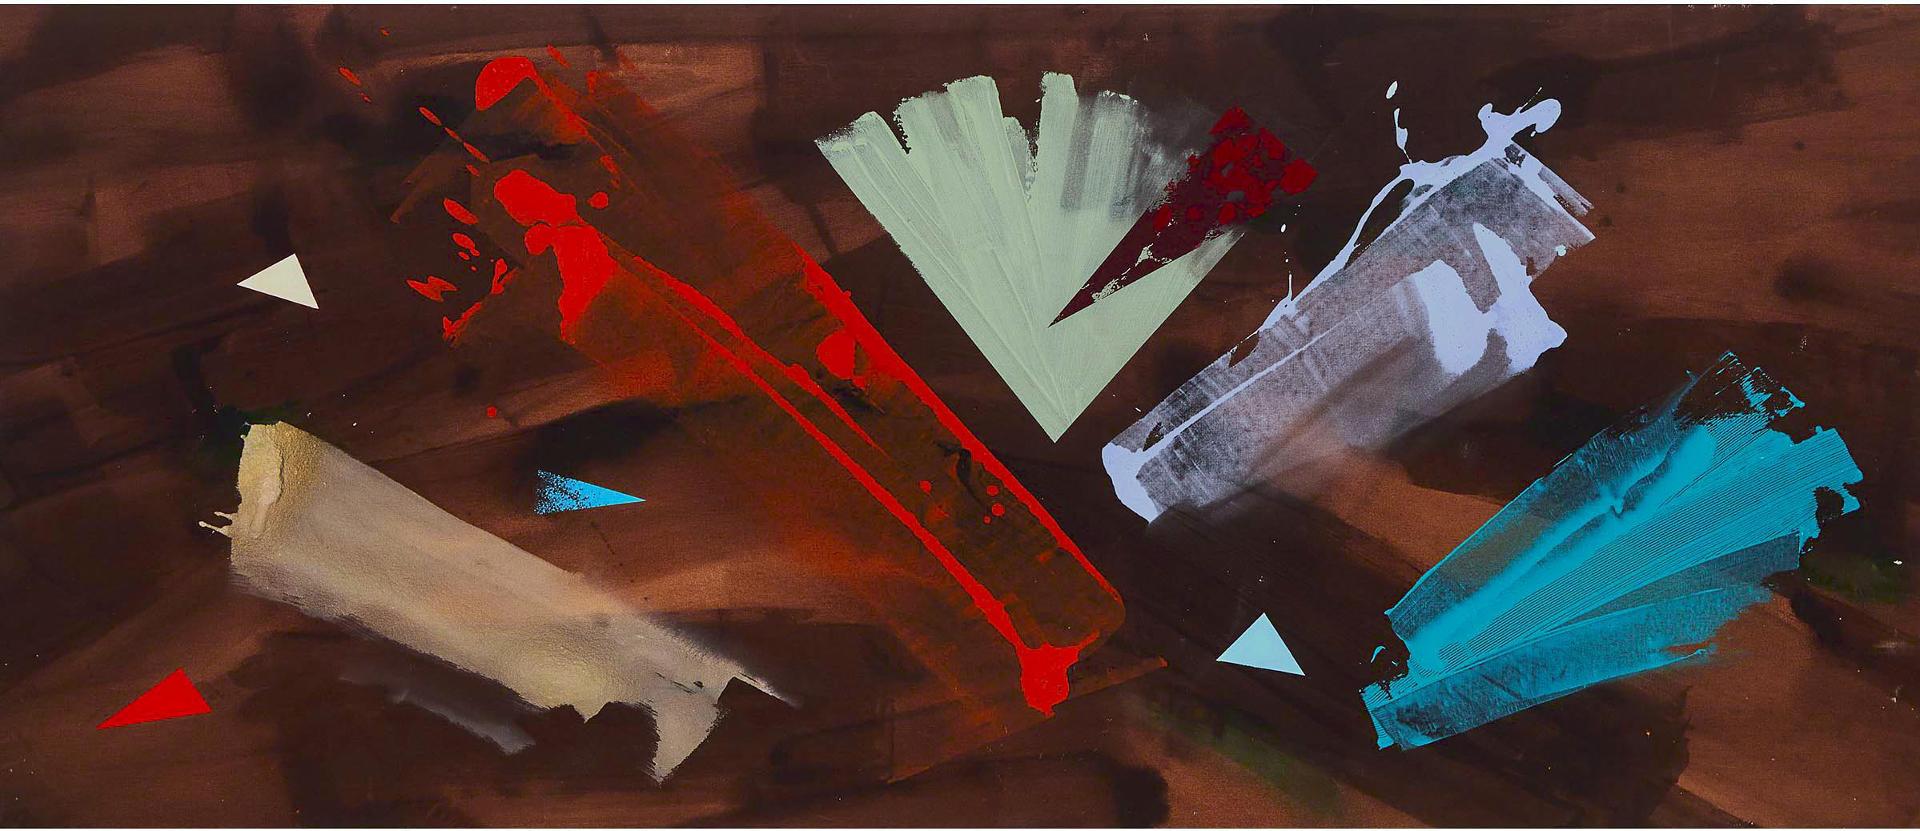 Milly Ristvedt (1942) - Triangle Lake, 1981